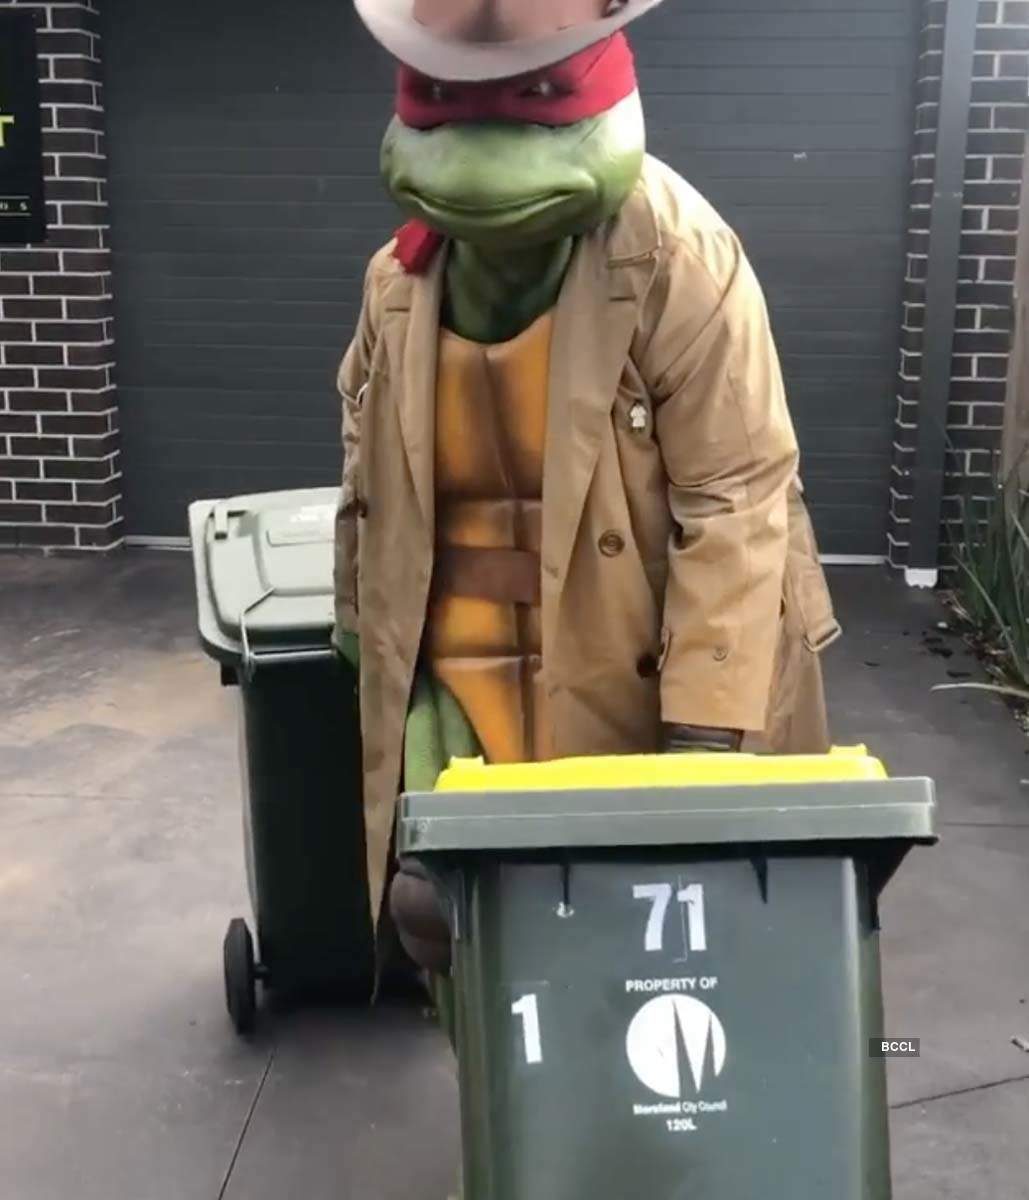 Hilarious pictures of people dressing up to take their trash out amid Covid-19